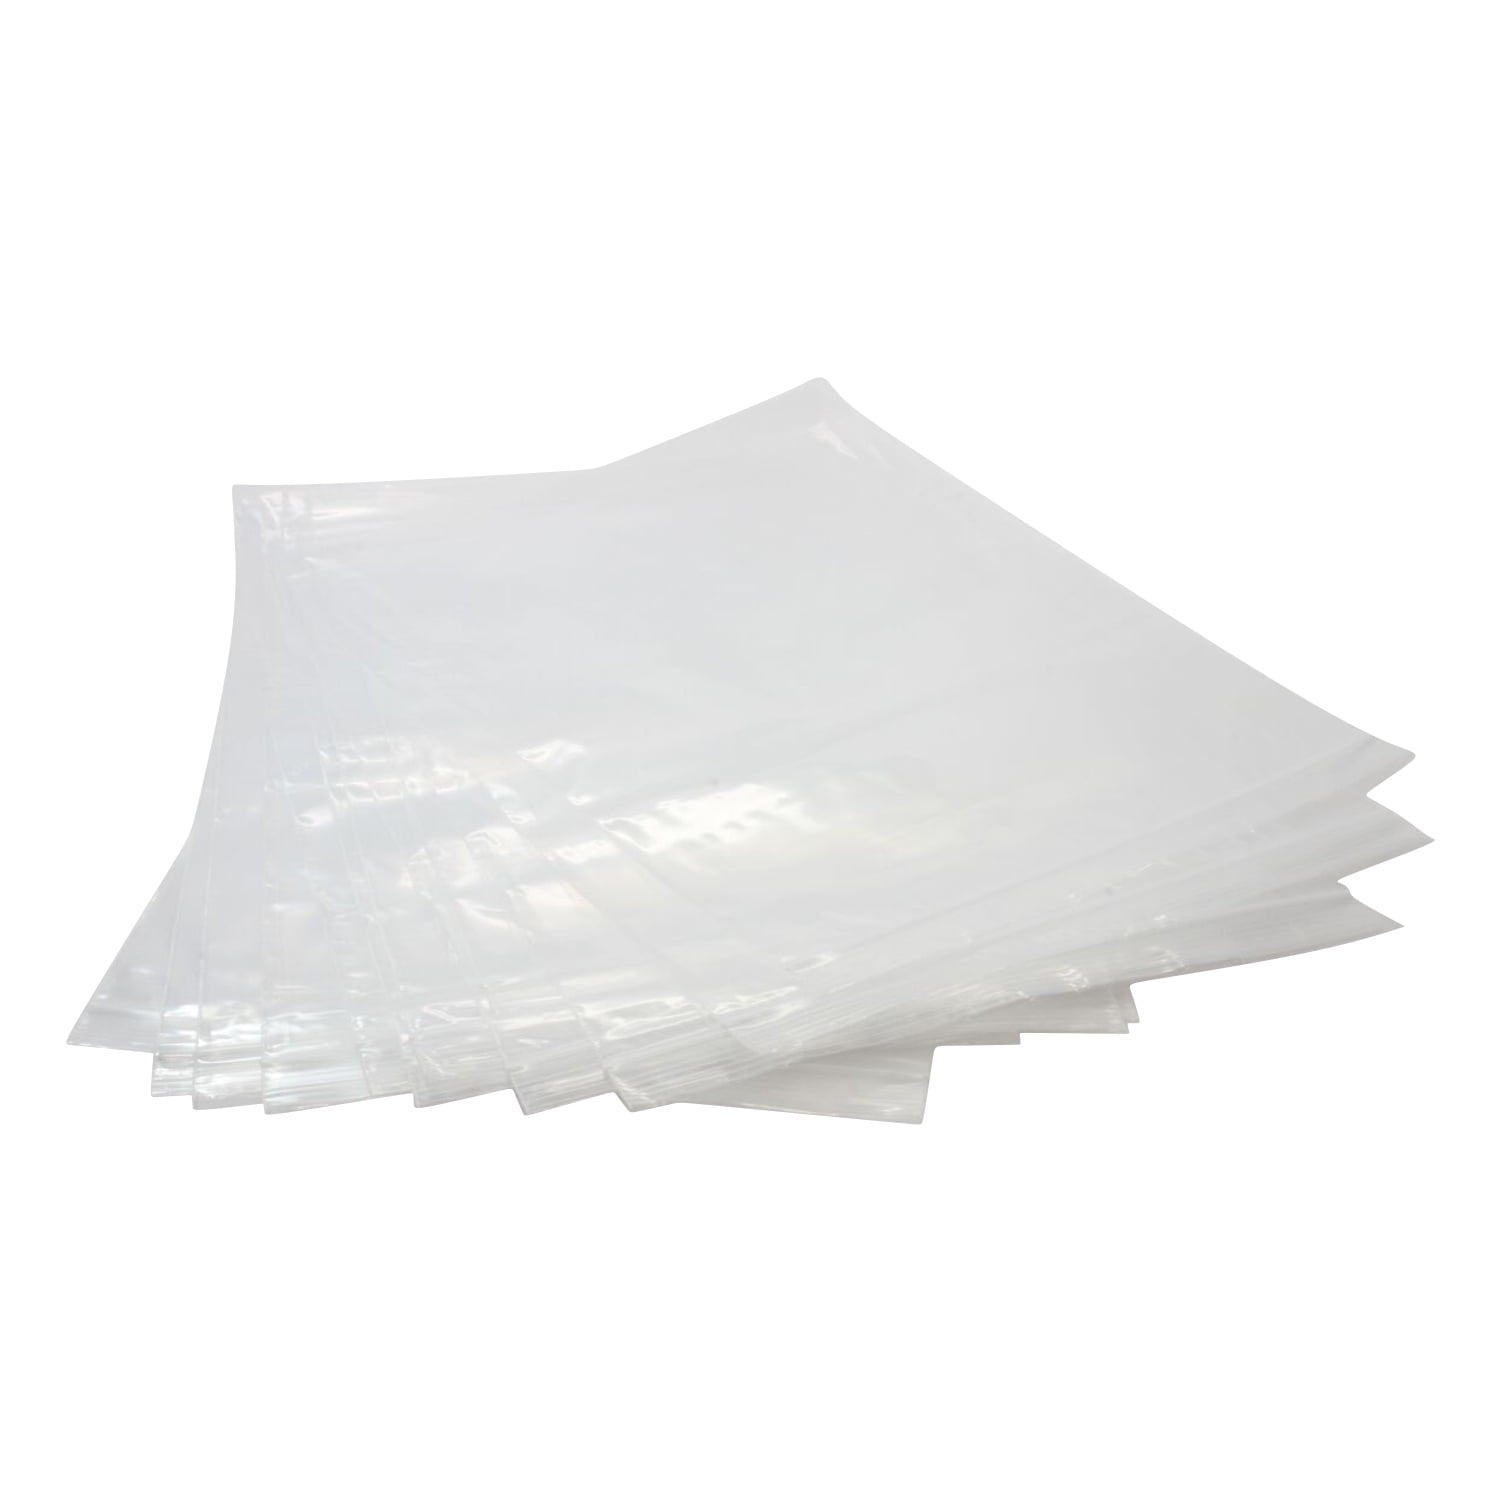 Clear Poly Bags 8x10-200 Pack Clear Bags for Packaging Clear Plastic Bags for Packaging Products Clear Packaging Bags 8x10, Resealable Plastic Packaging Bags 